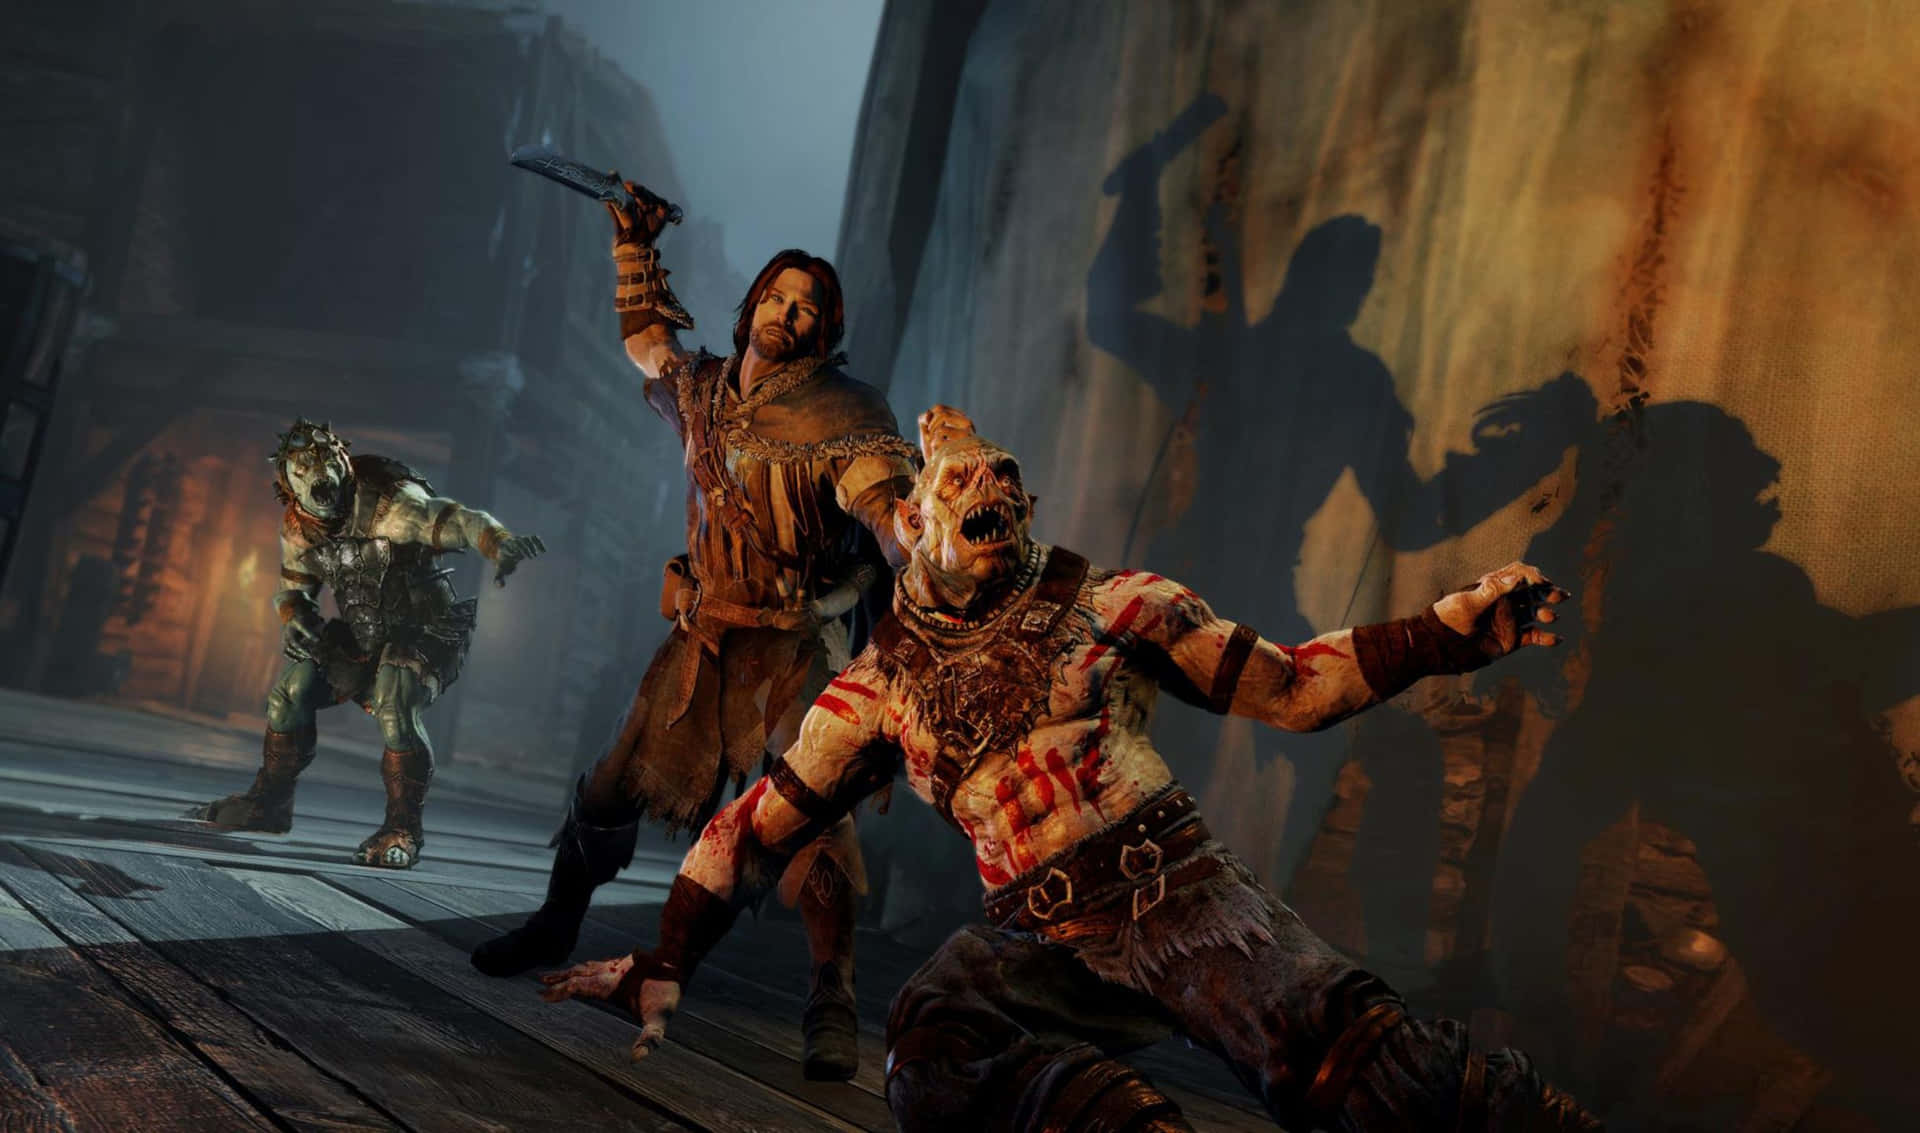 Fight for the fate of Mordor in the action-packed Middle-earth video game